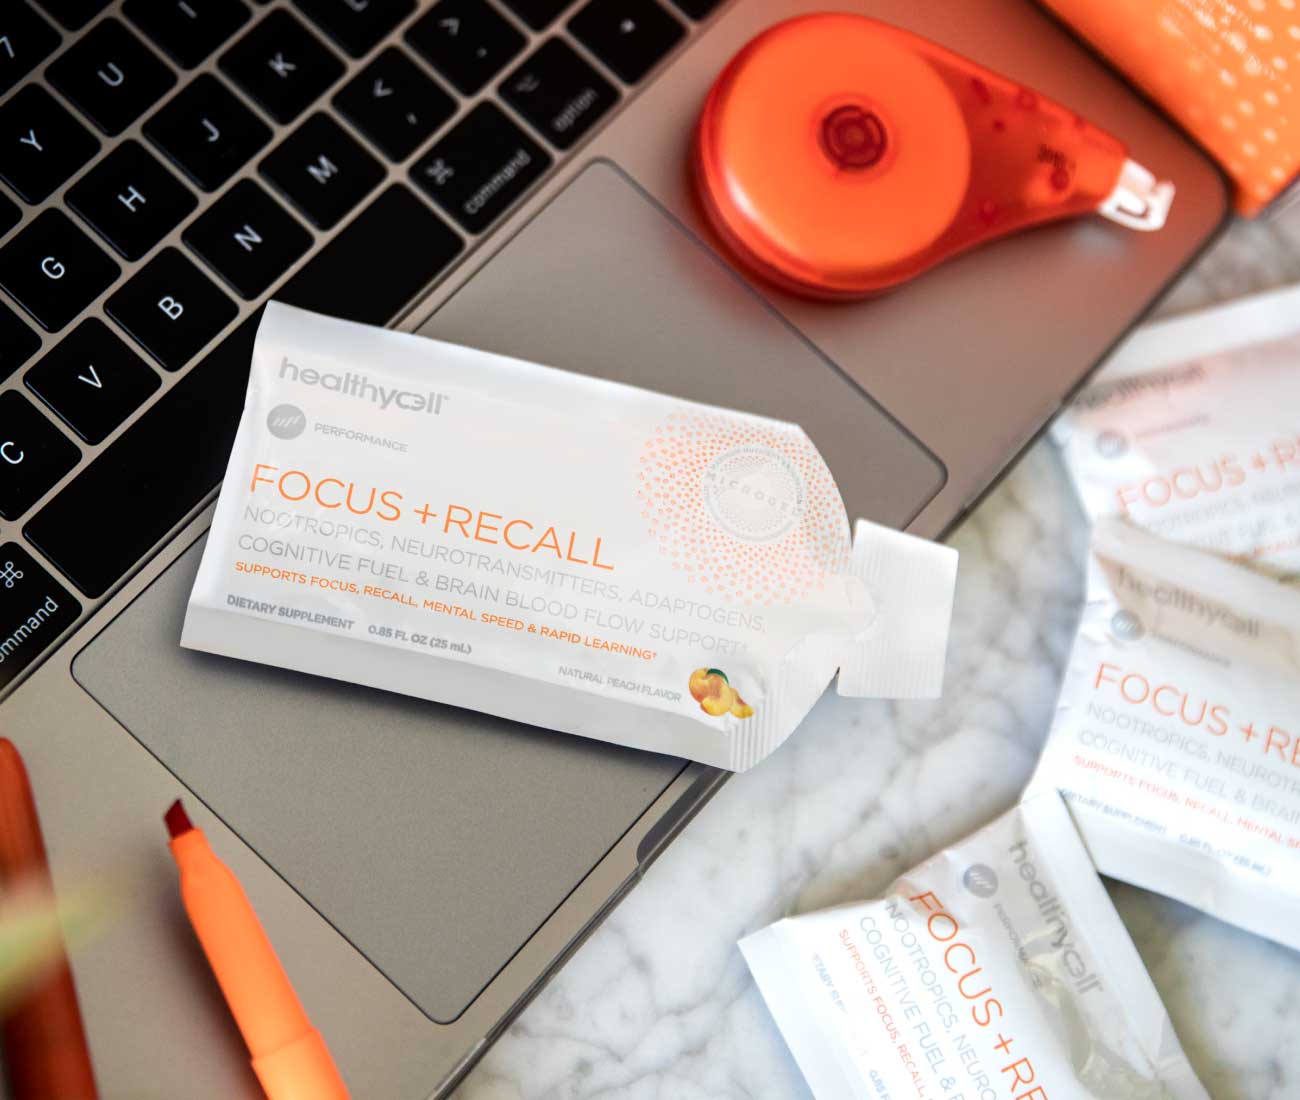  Focus + Recall by Healthycell Healthycell Perfumarie